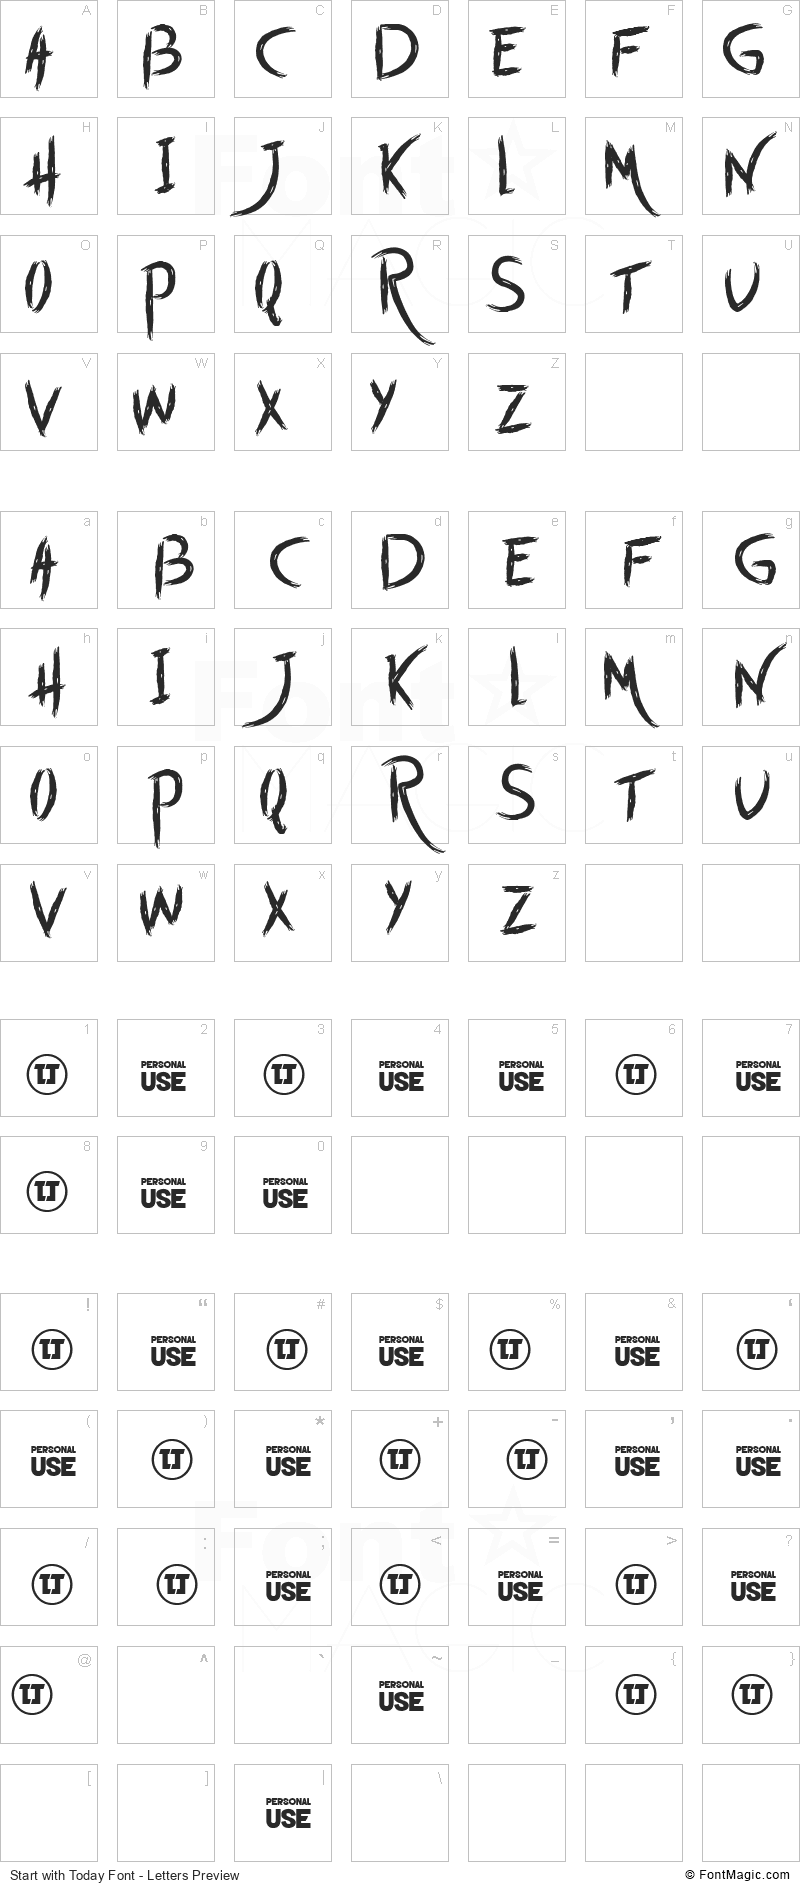 Start with Today Font - All Latters Preview Chart